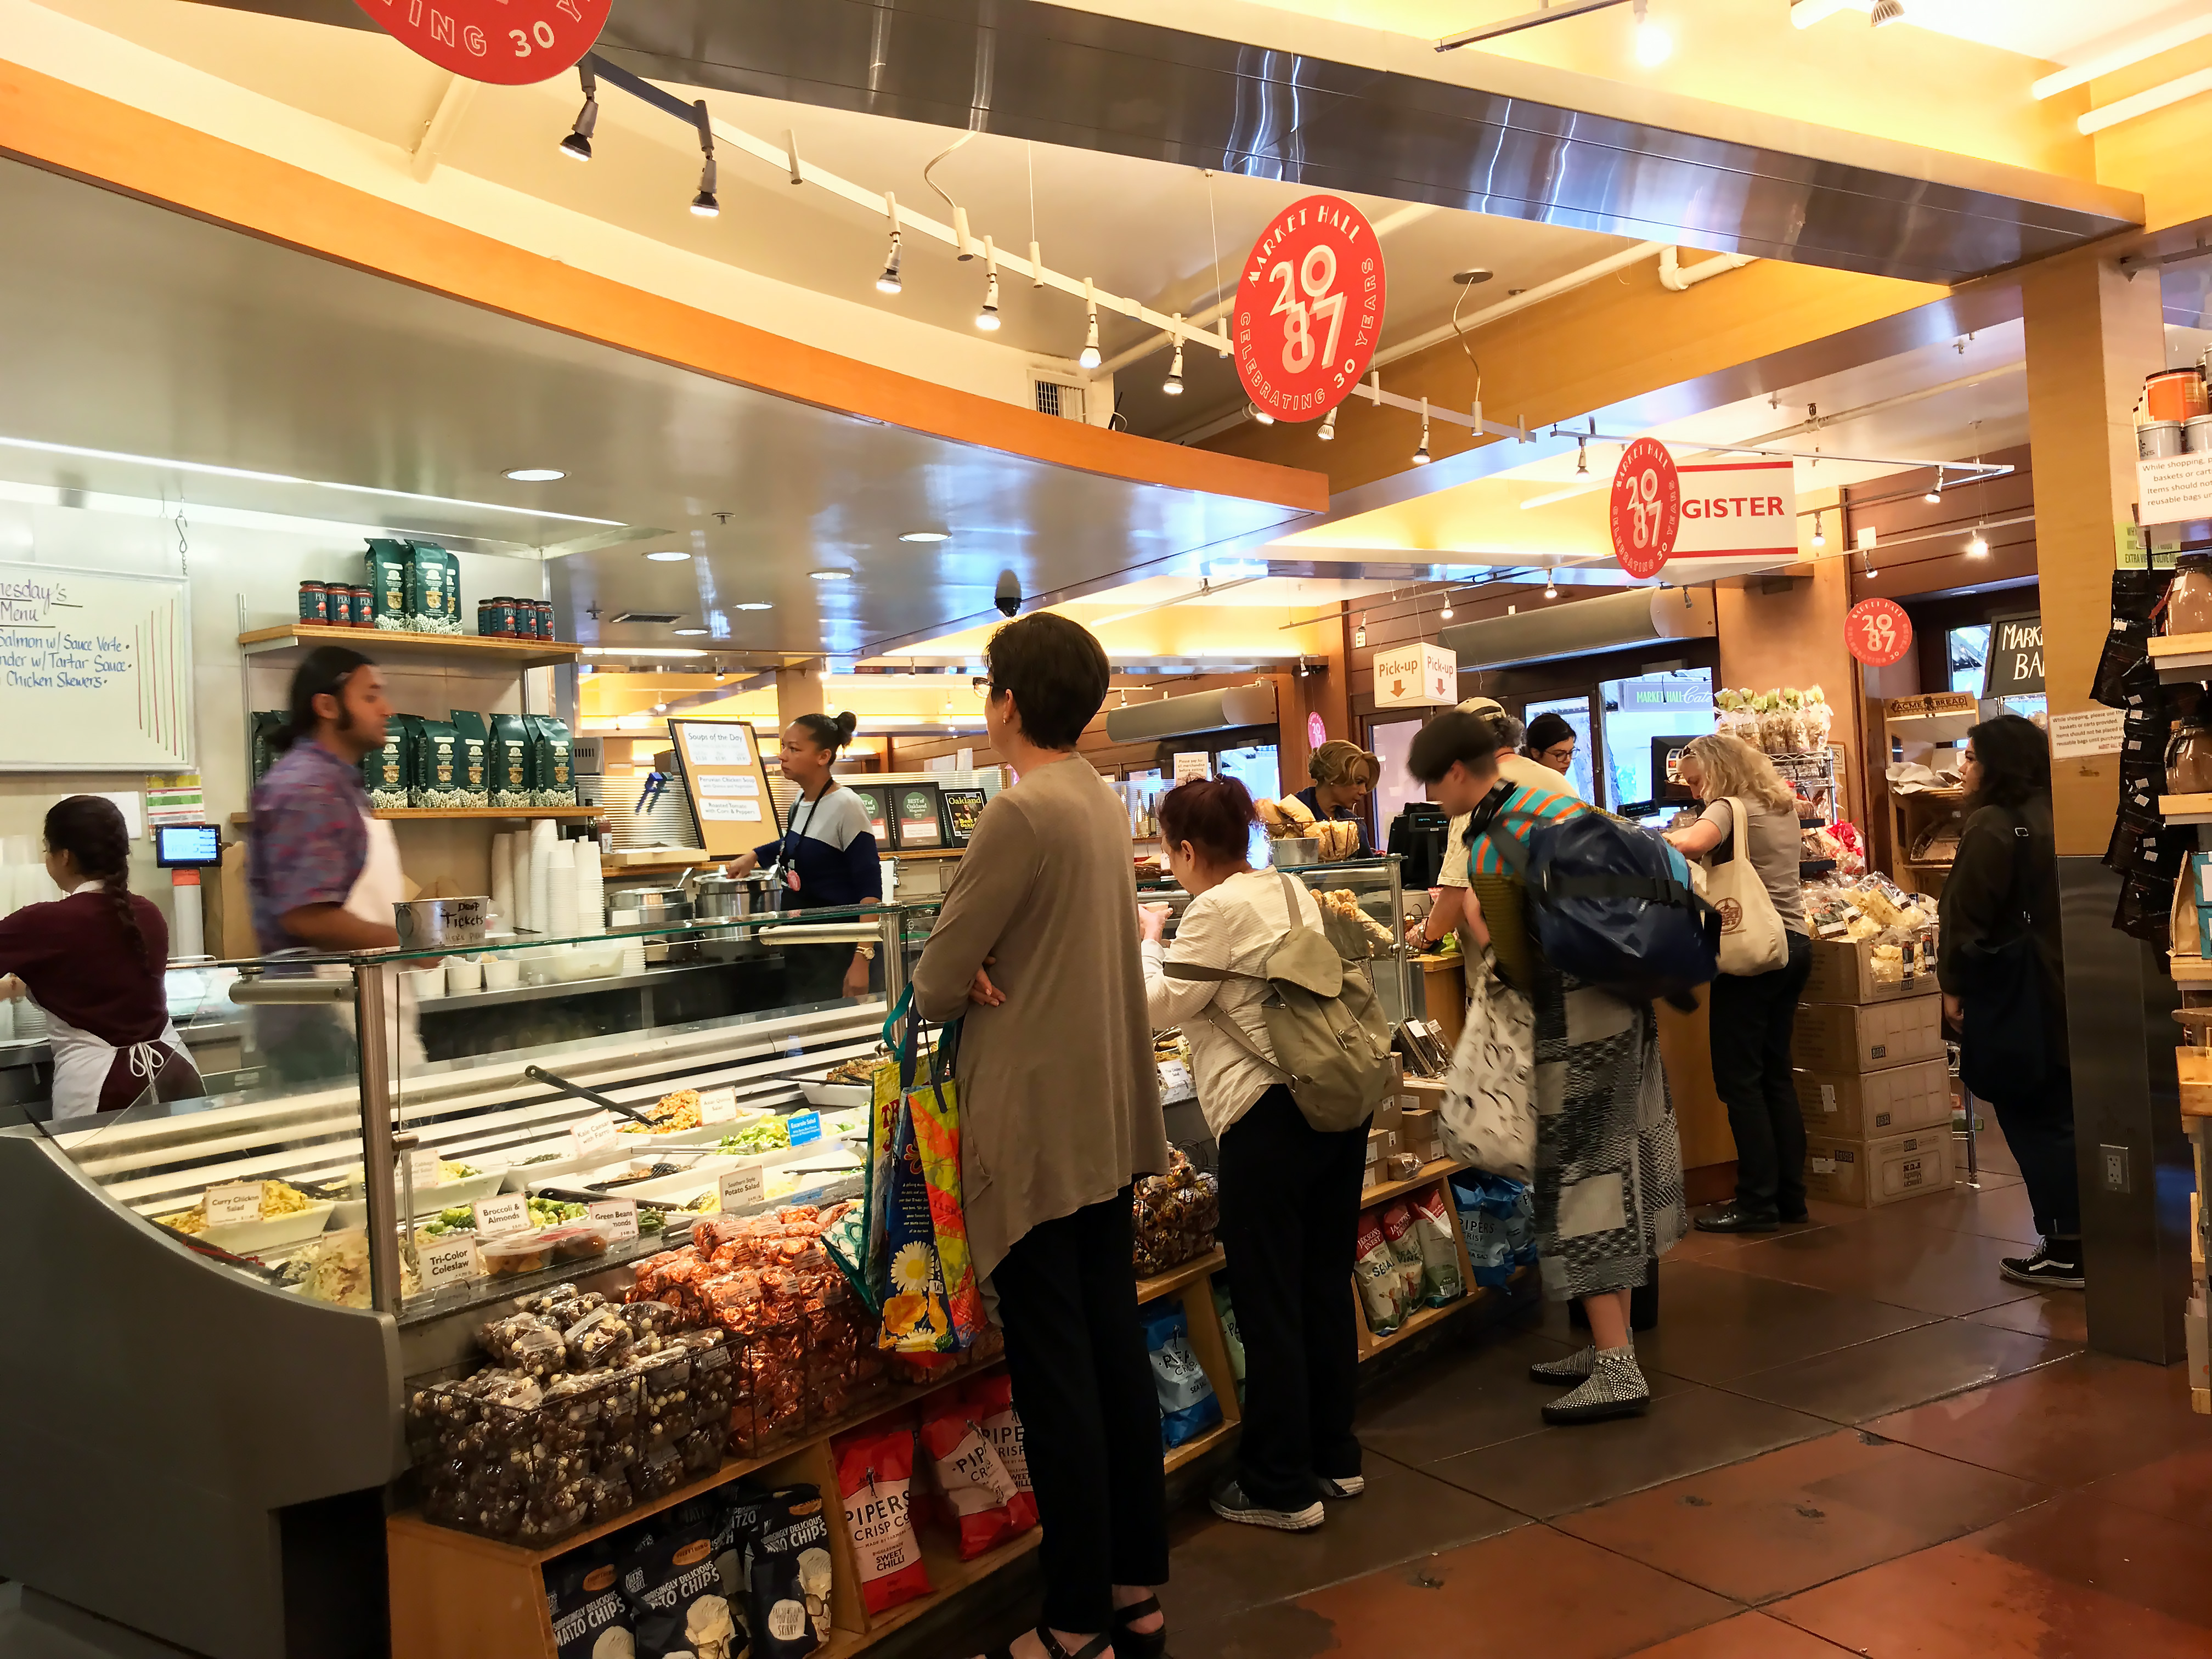 The deli at Market Hall offers prepared food